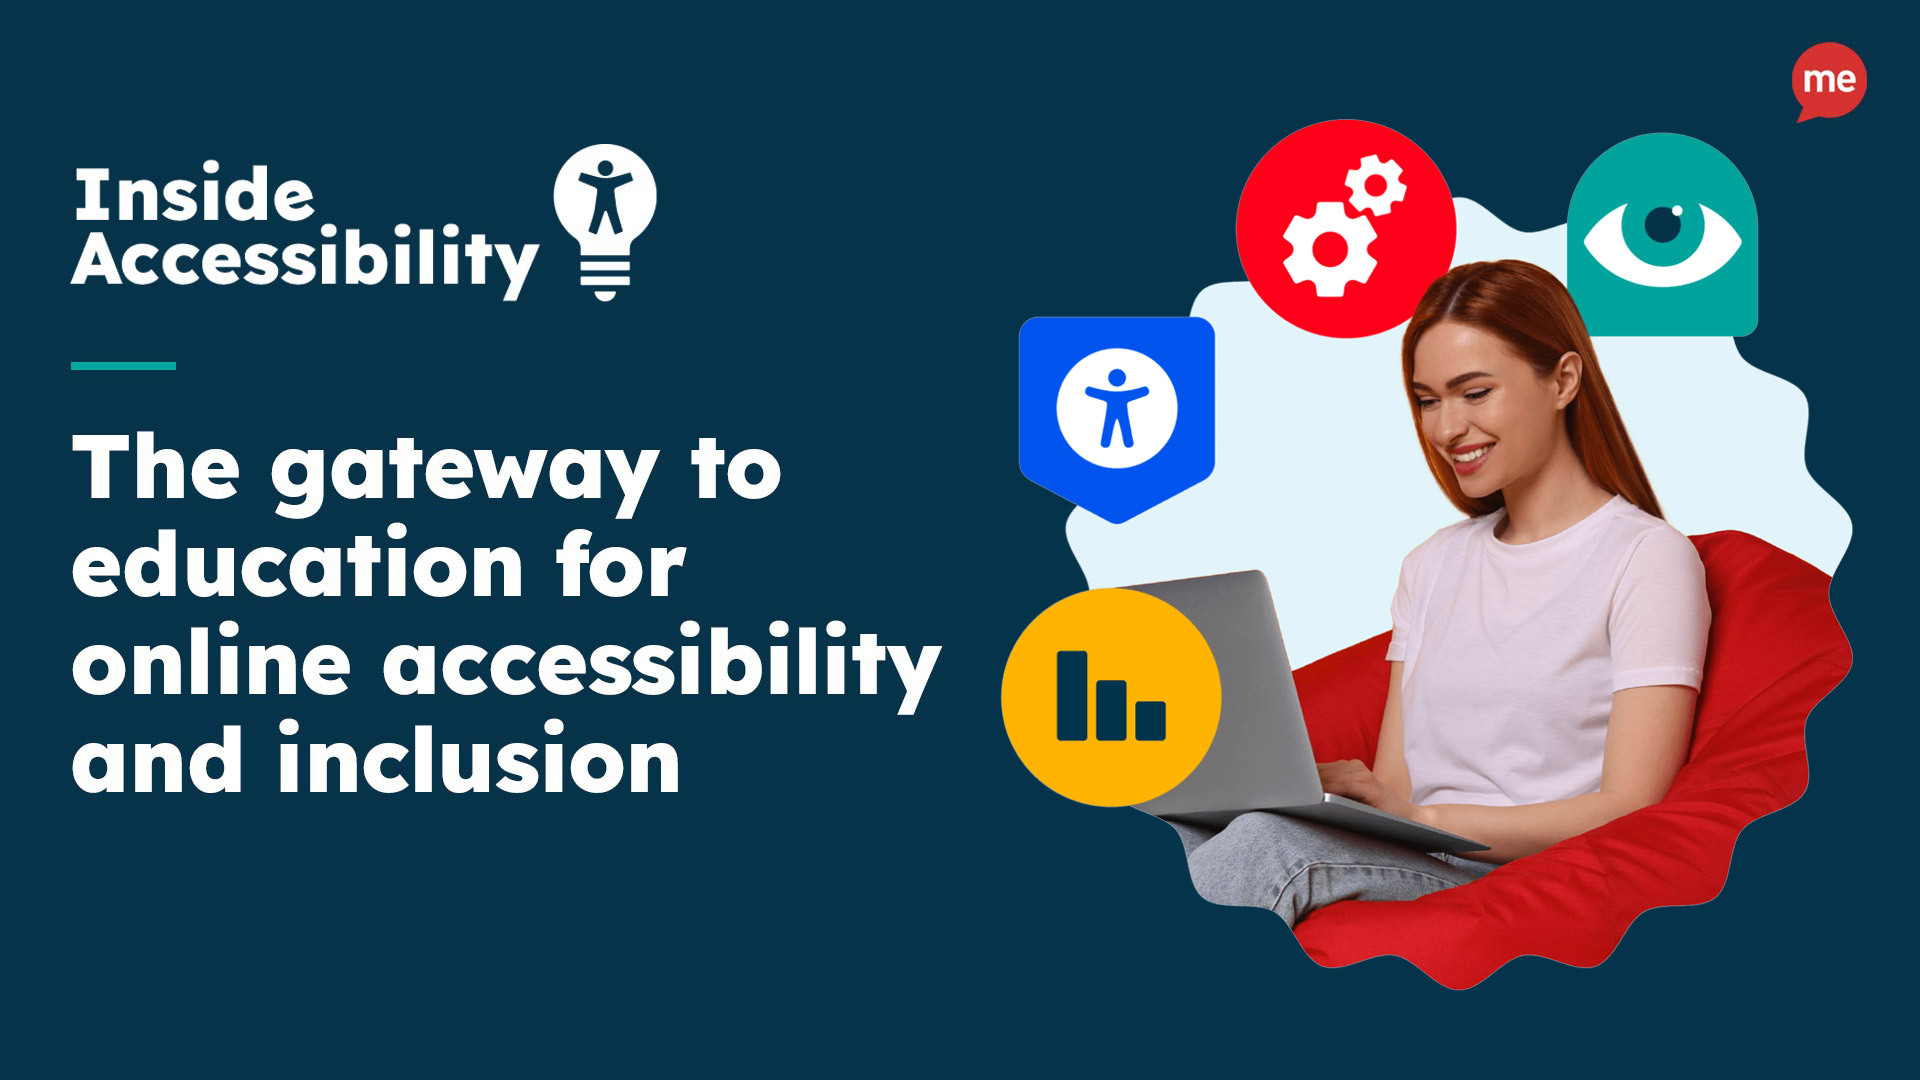 The gateway to education for online accessibility and inclusion